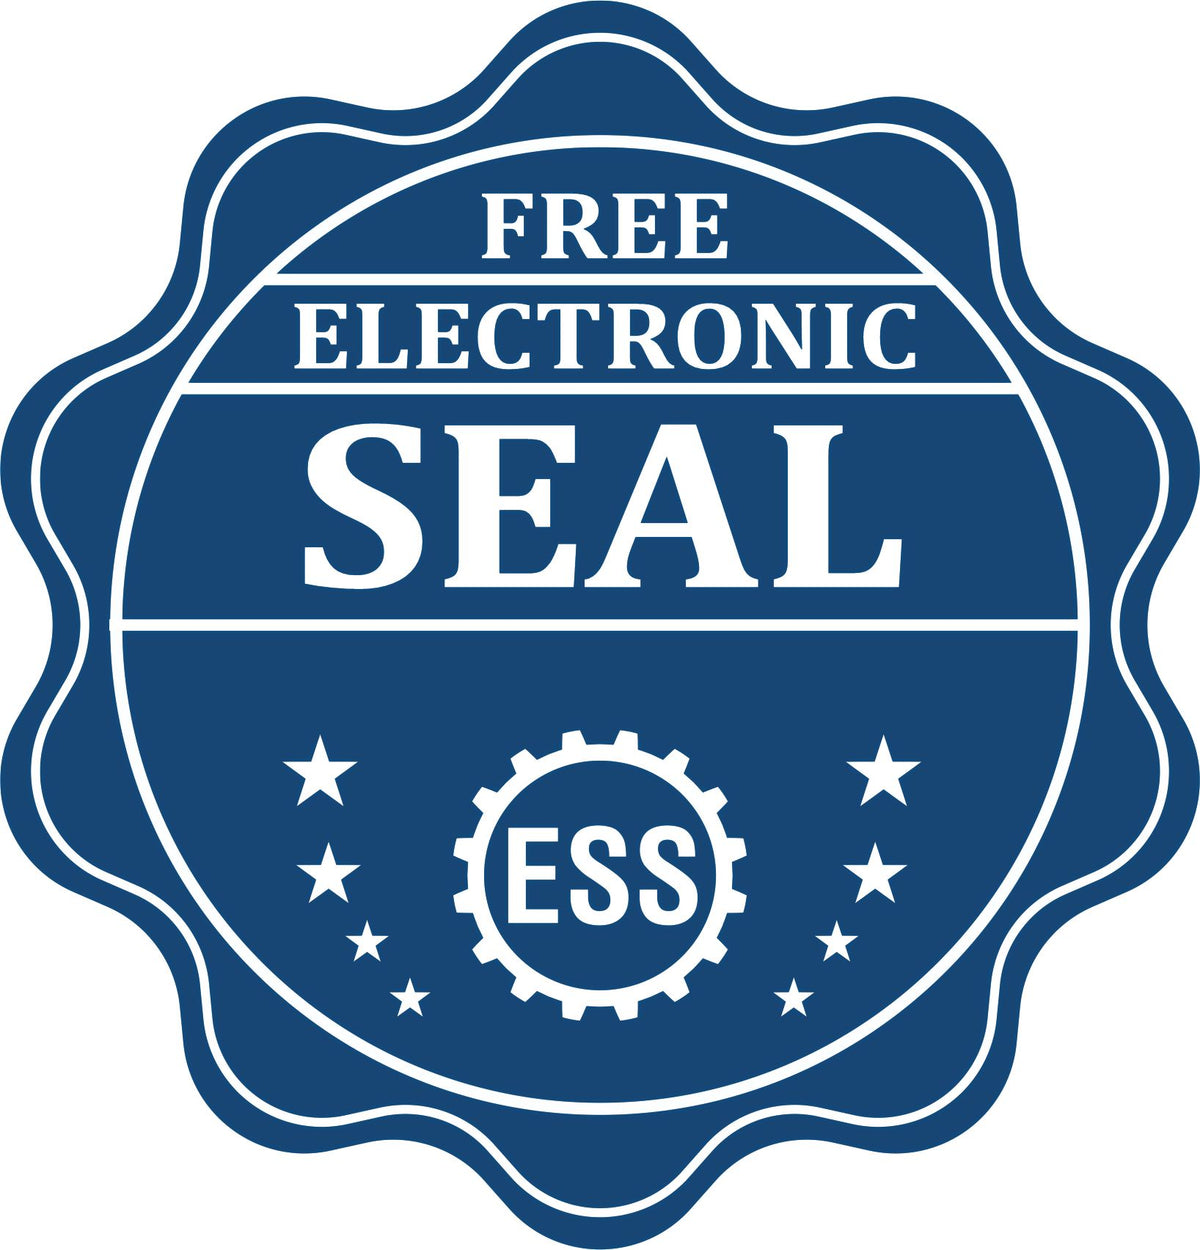 A badge showing a free electronic seal for the Hybrid North Carolina Geologist Seal with stars and the ESS gear on the emblem.